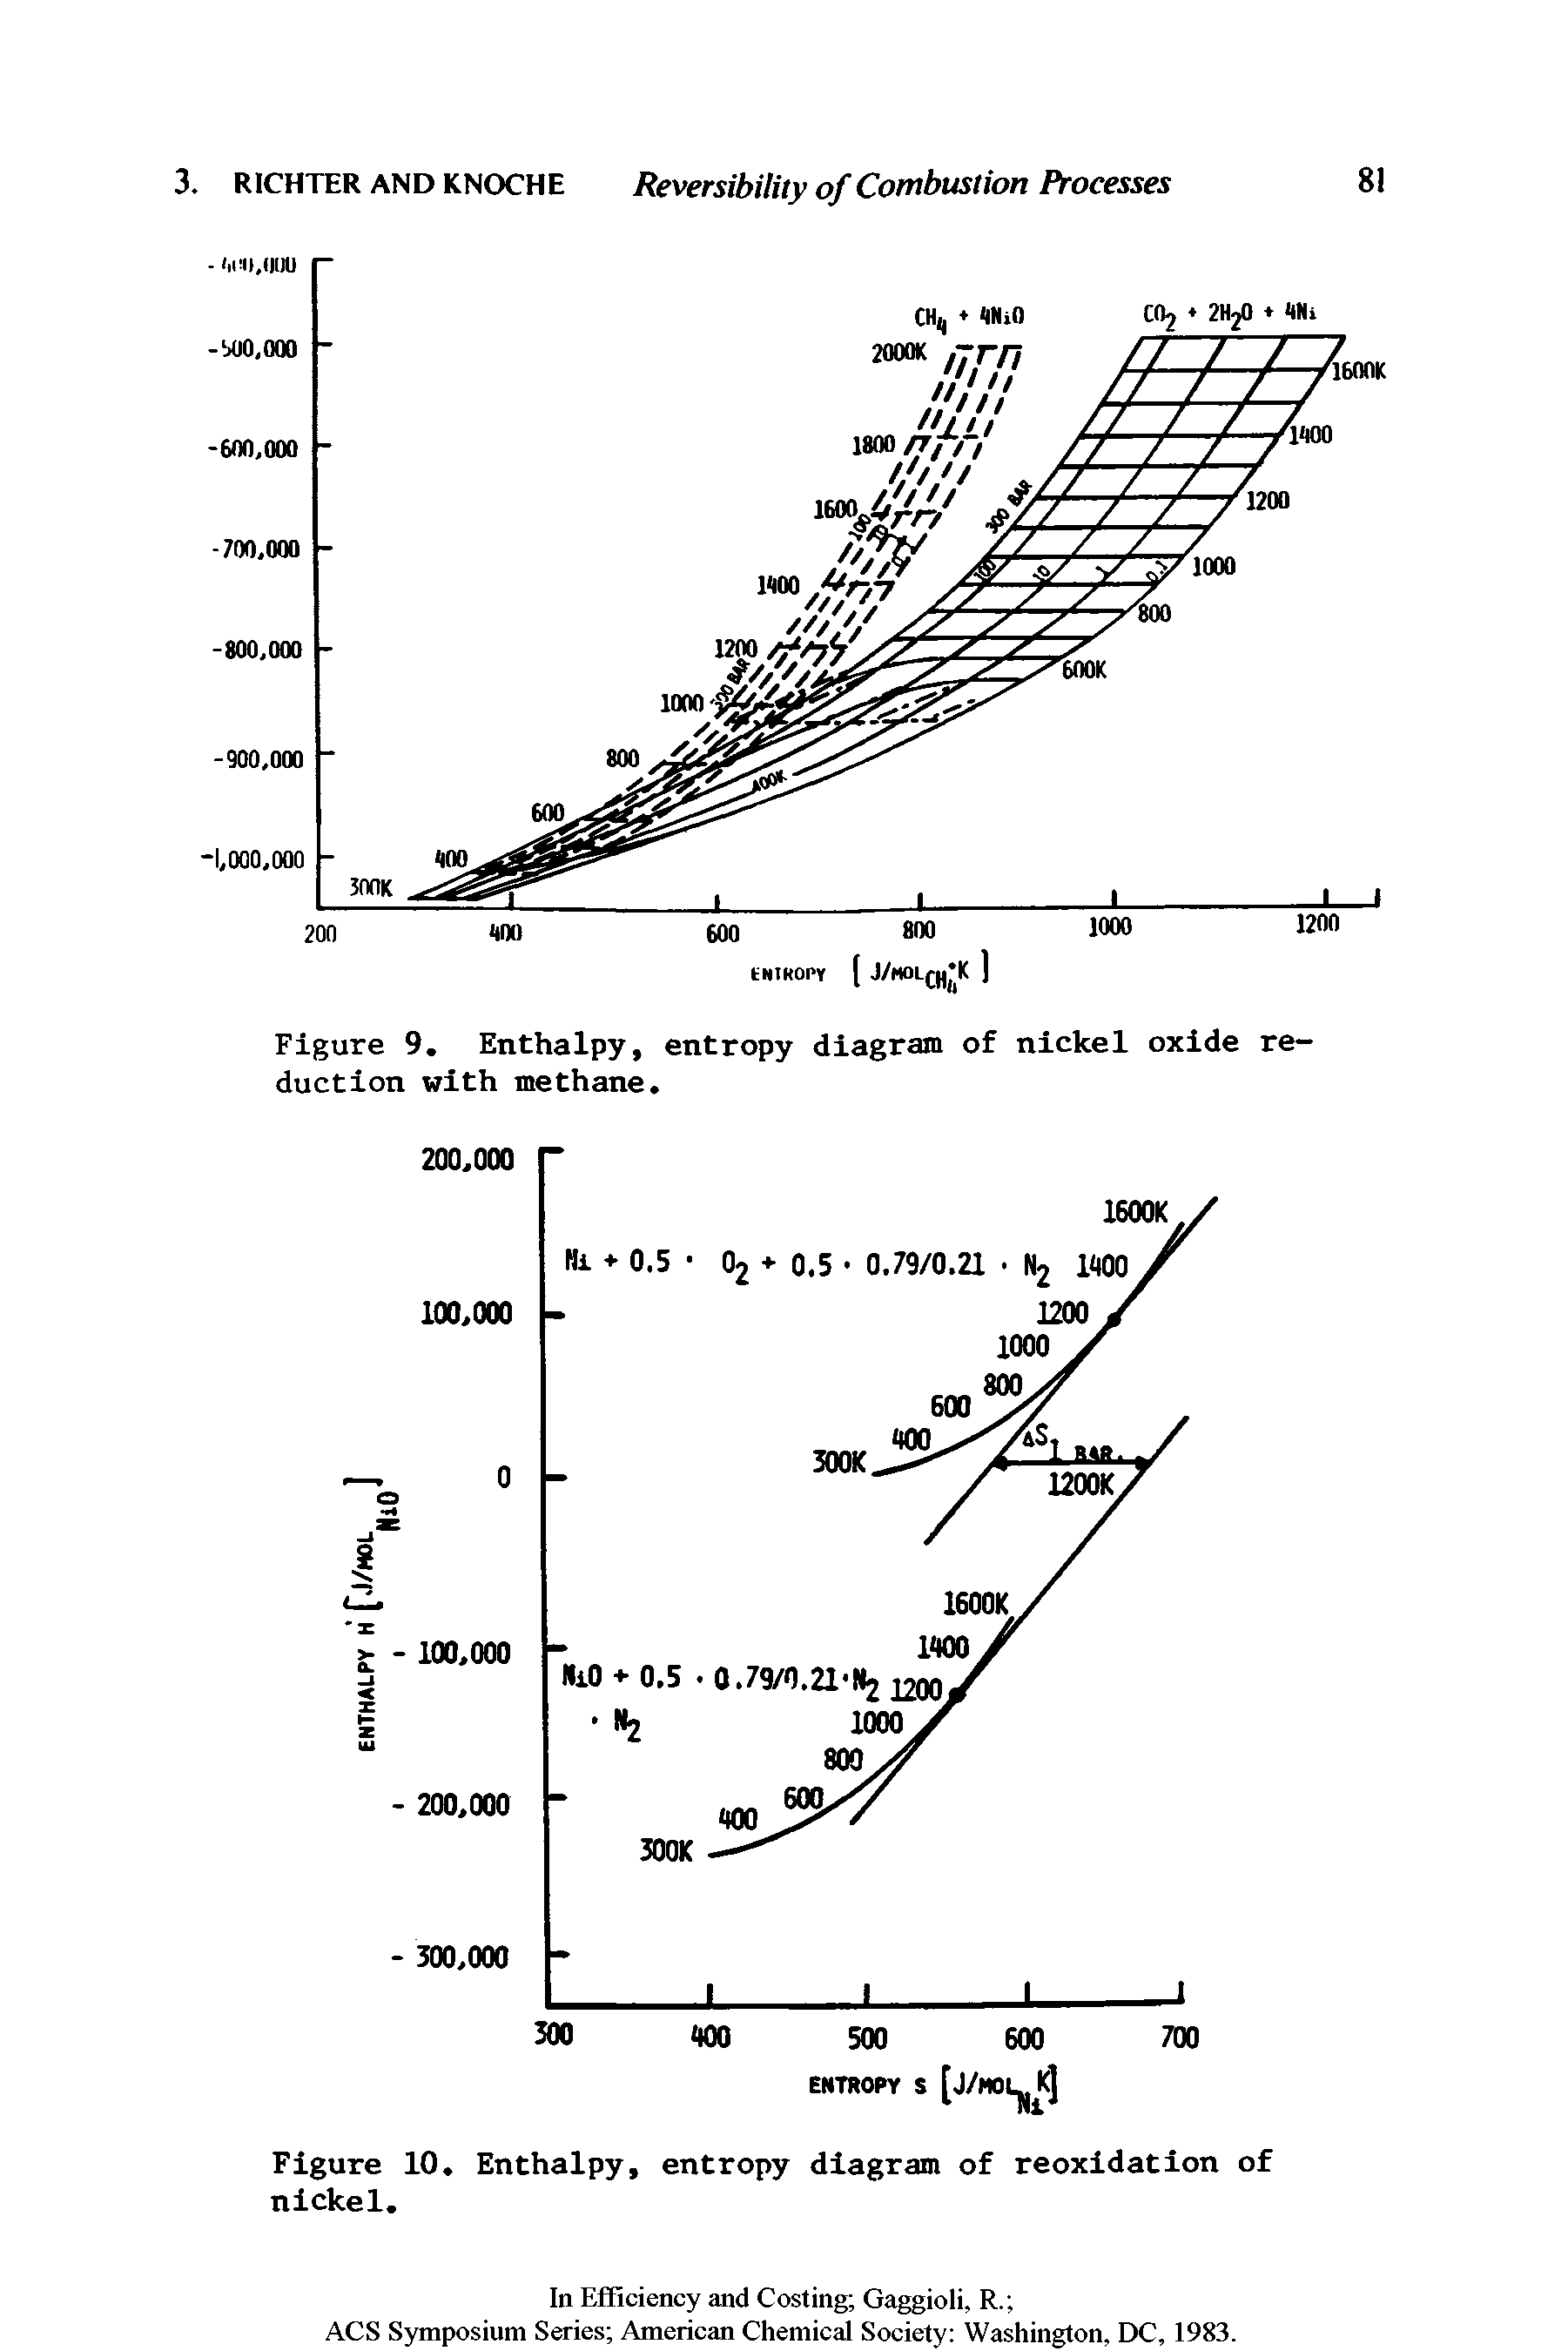 Figure 9. Enthalpy, entropy diagram of nickel oxide reduction with methane.